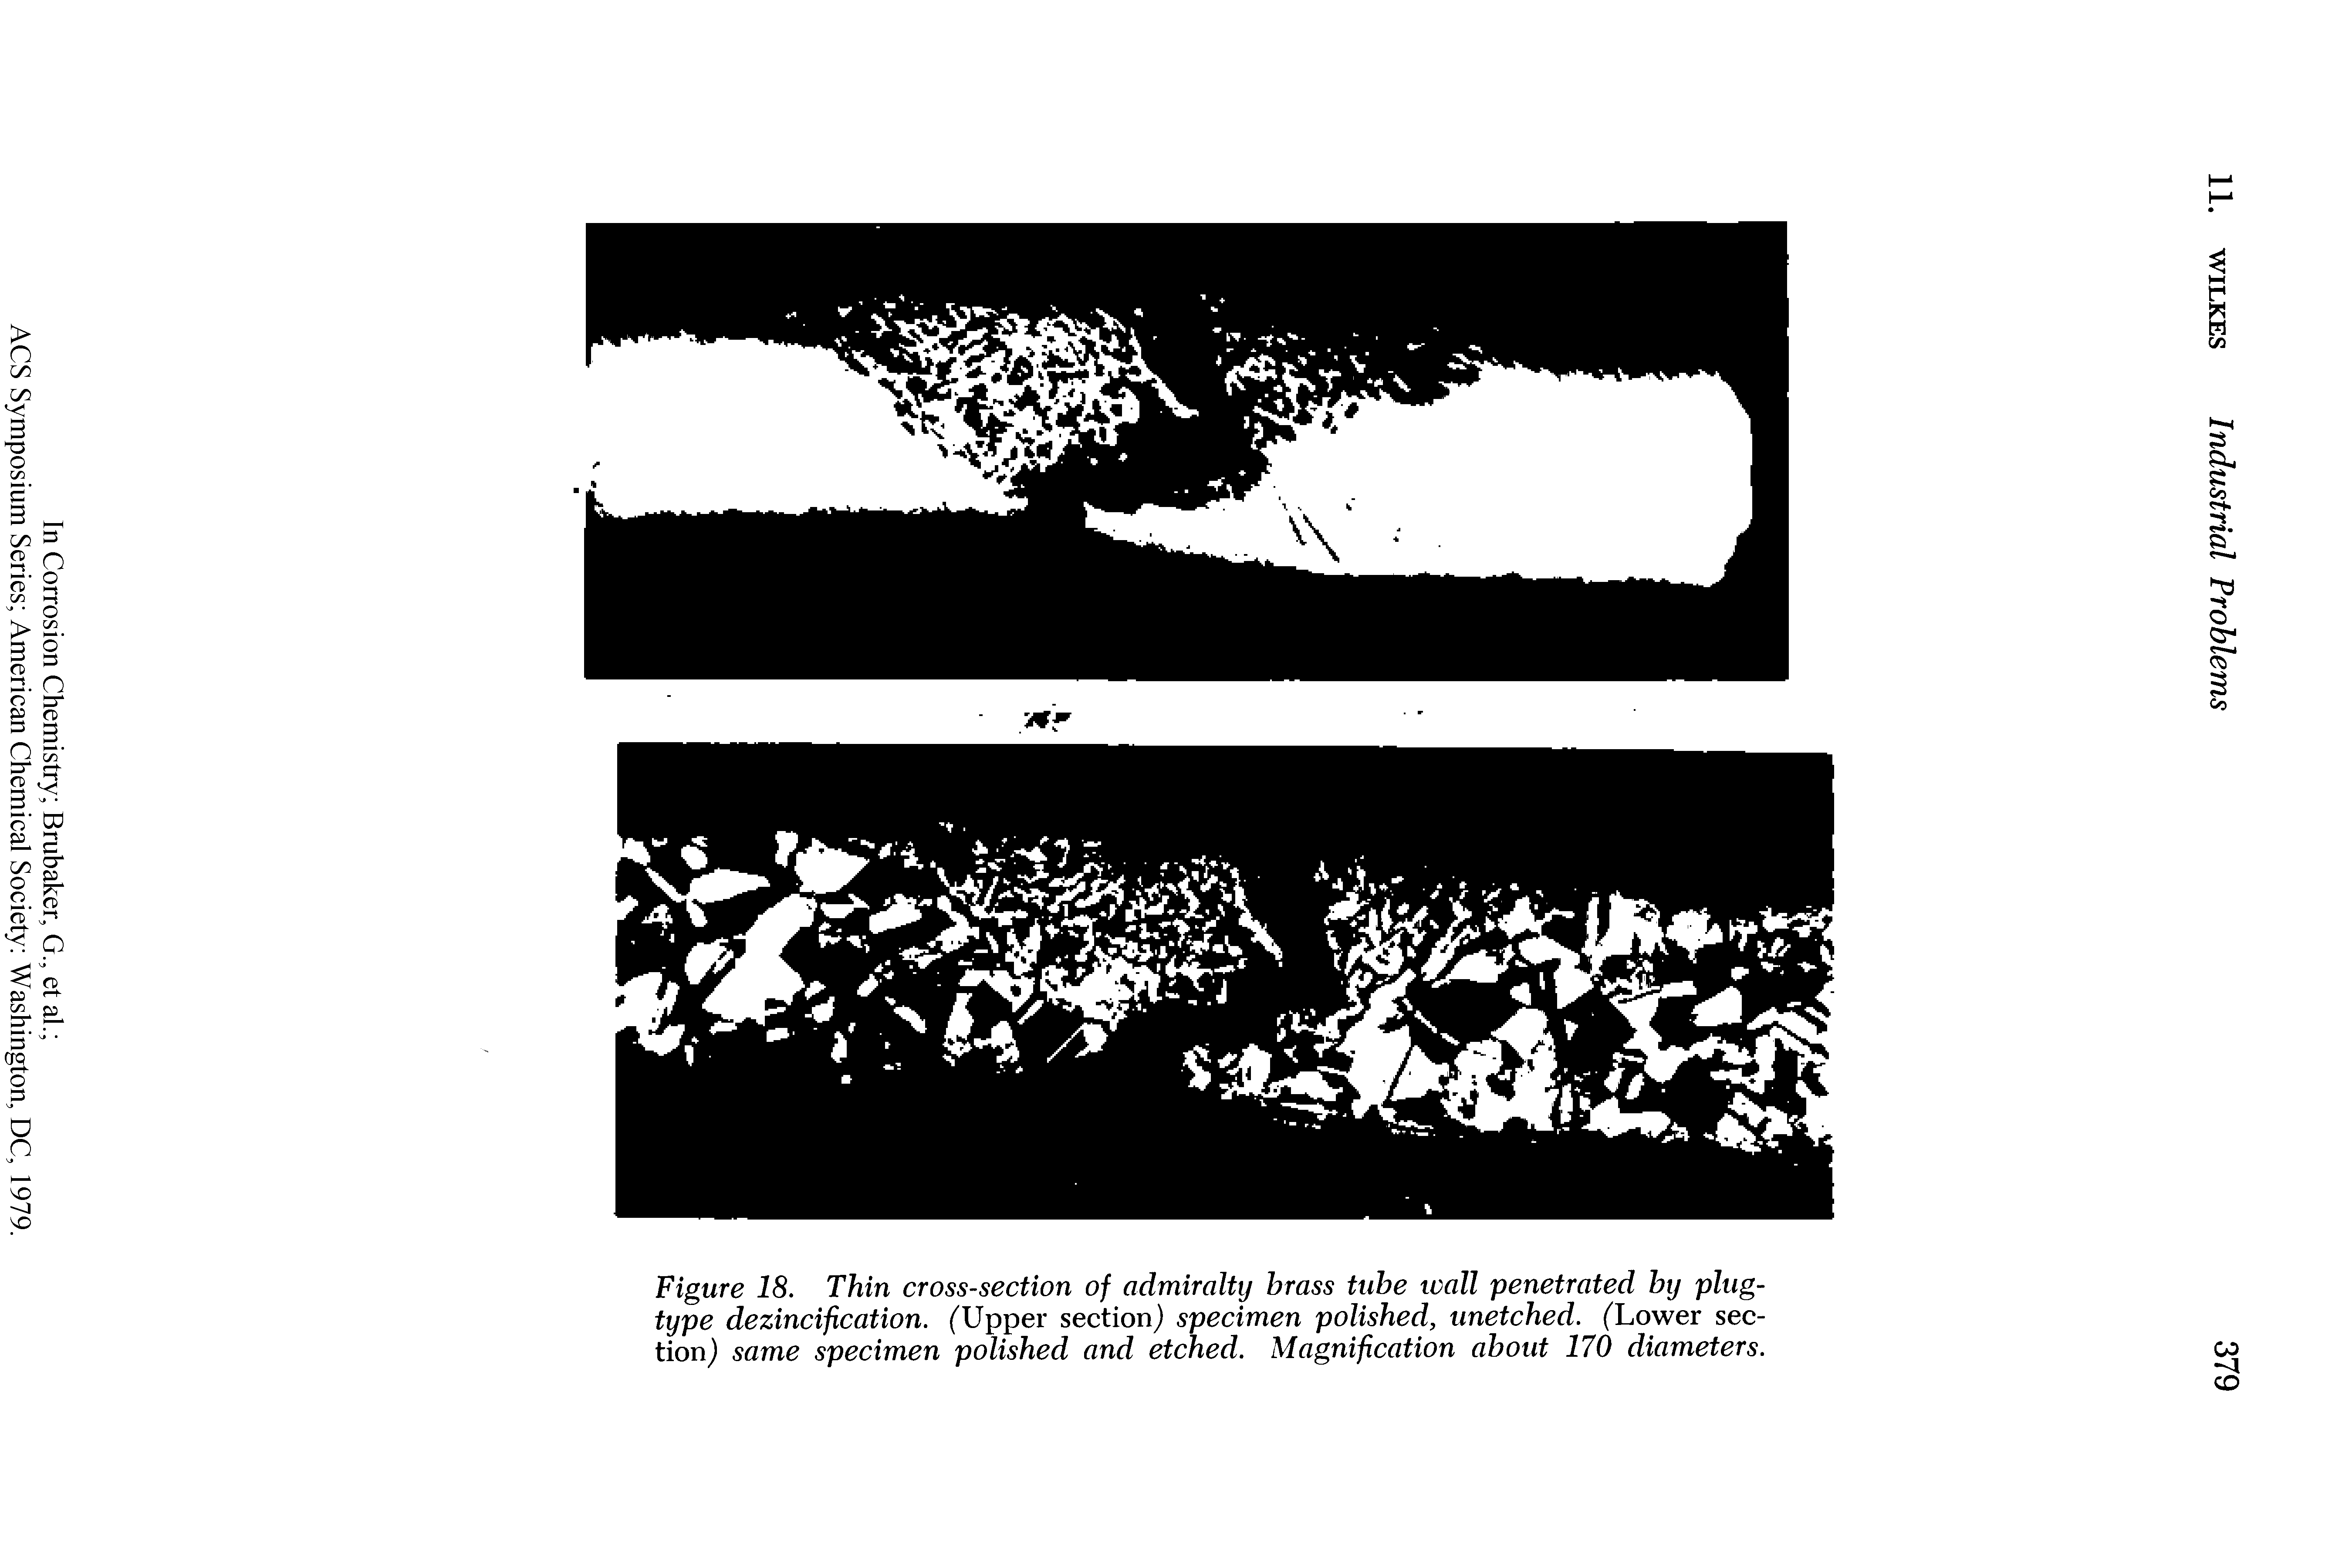 Figure 18. Thin cross-section of admiralty brass tube wall penetrated by plug-type dezincification. (Upper section) specimen polished, unetched. (Lower section) same specimen polished and etched. Magnification about 170 diameters.